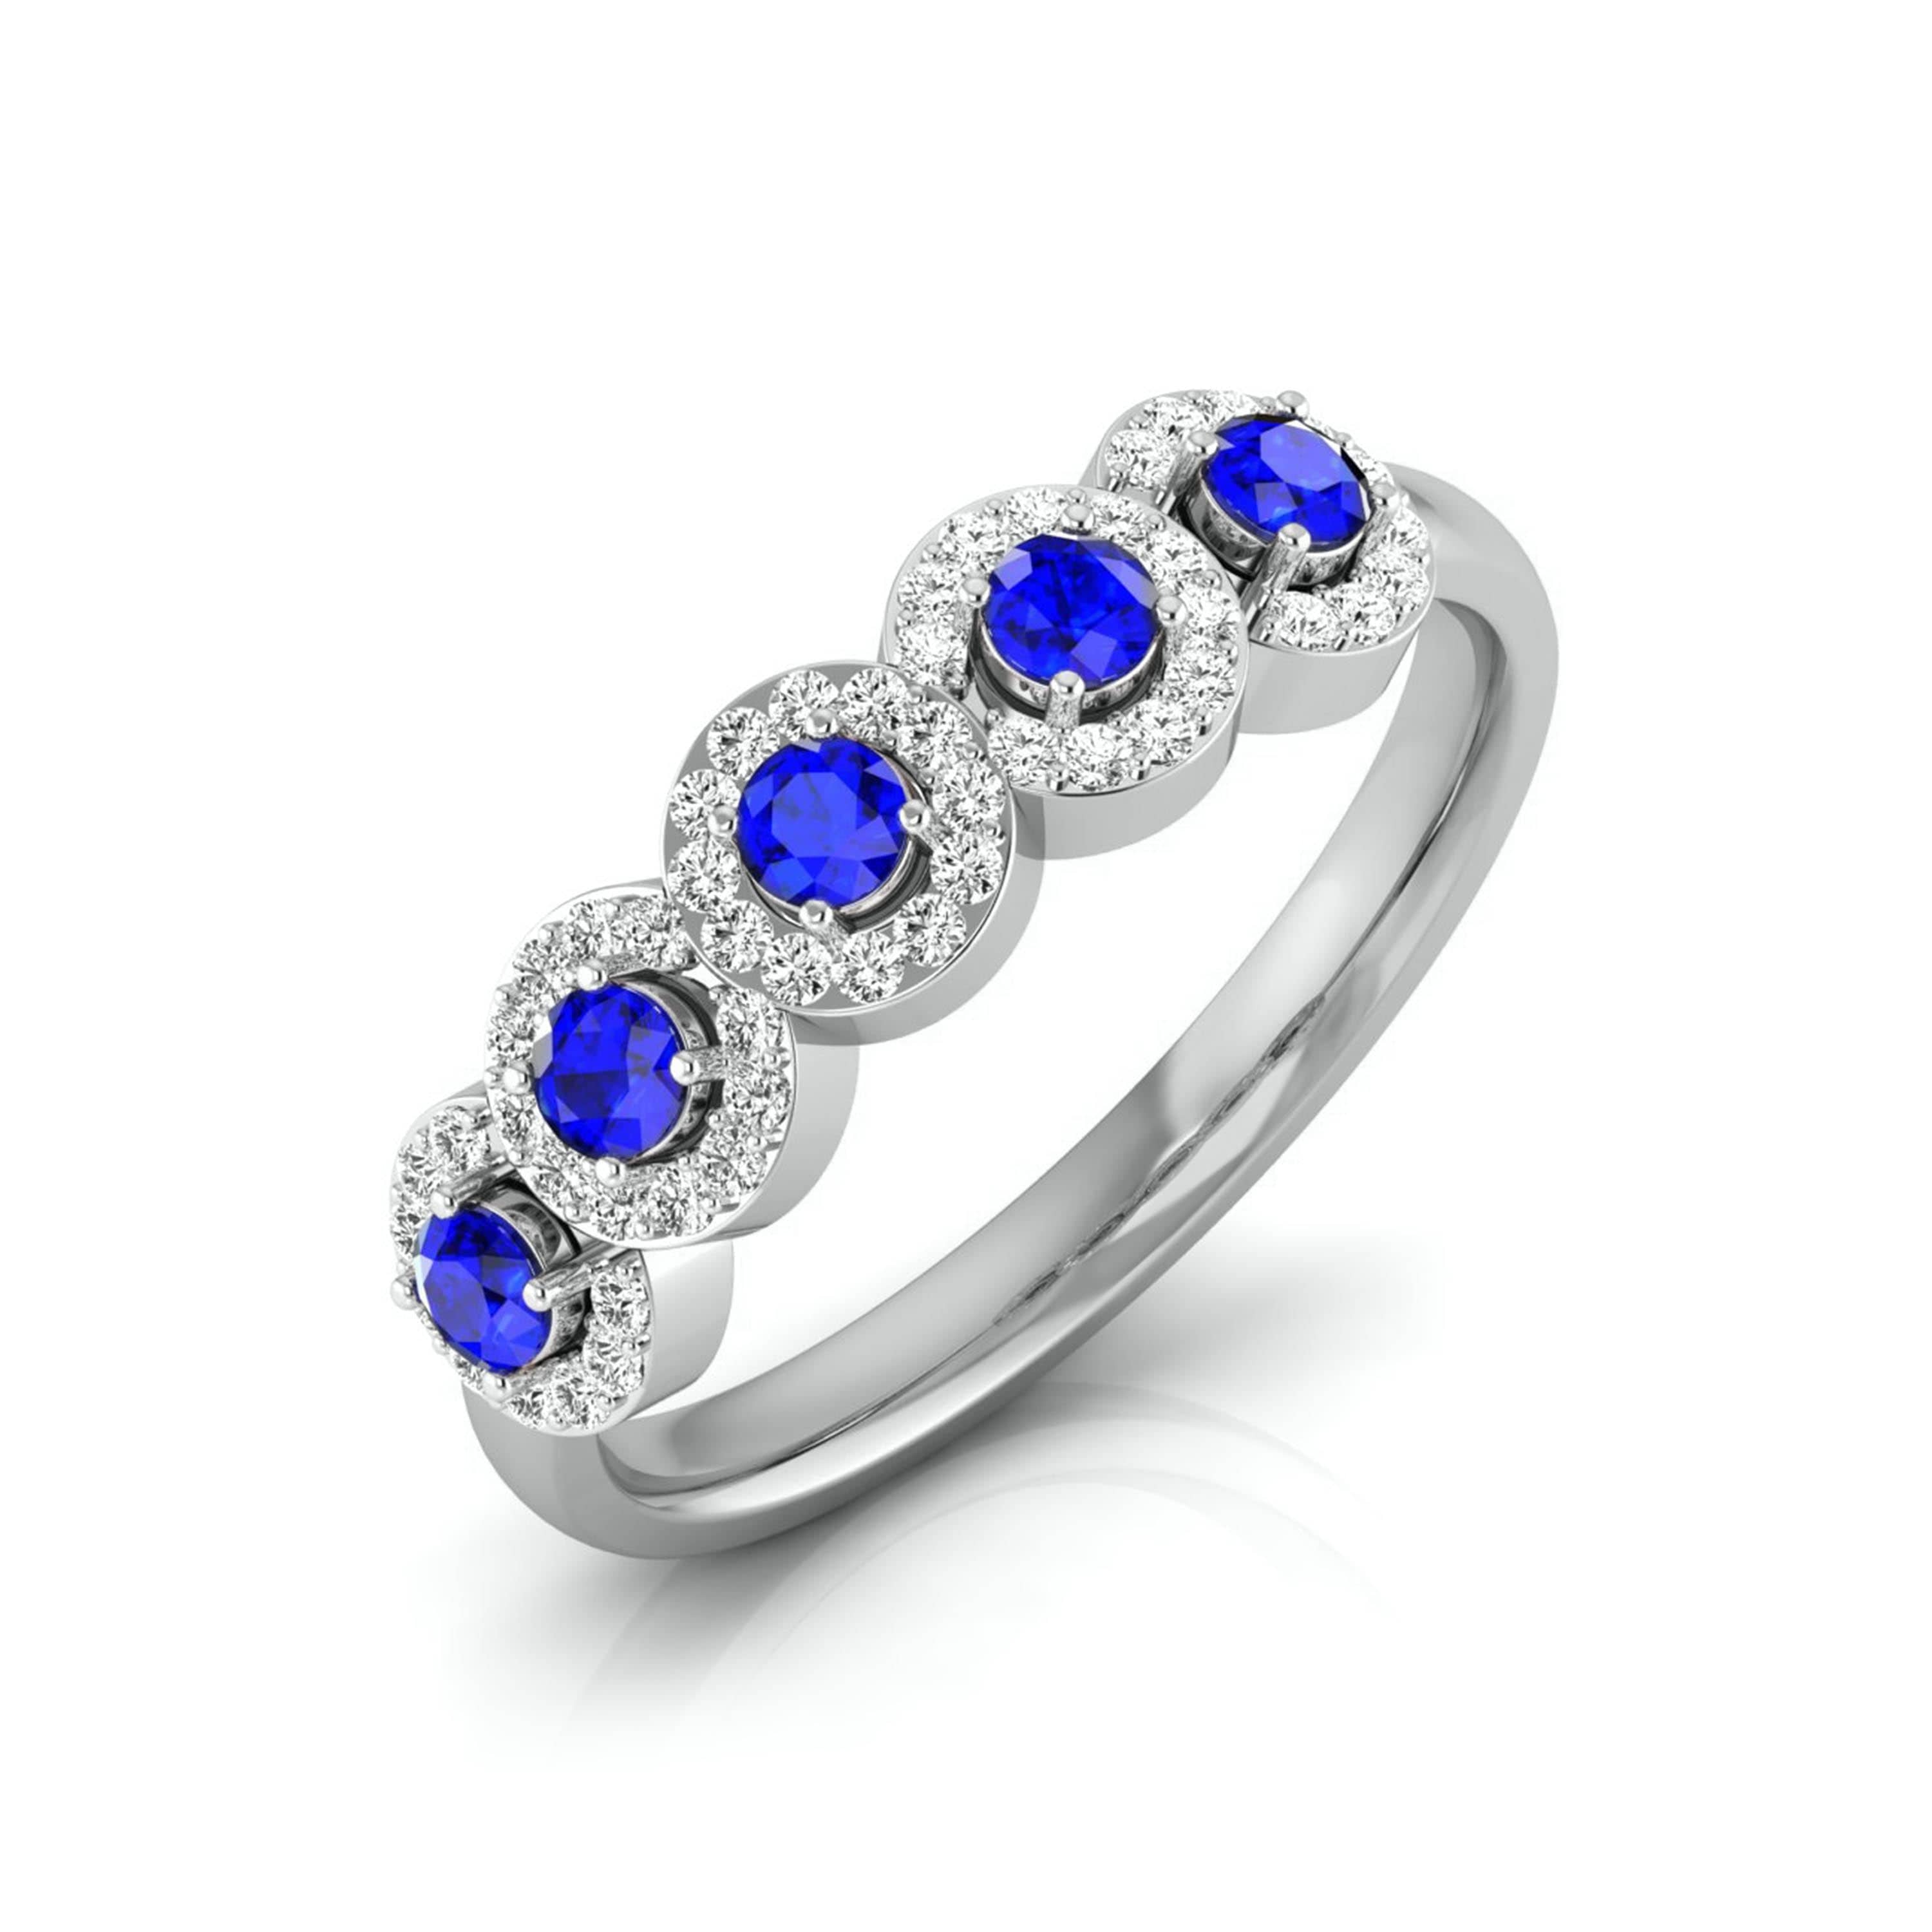 Halo Oval Cut Blue Sapphire Engagement Ring Sterling Silver